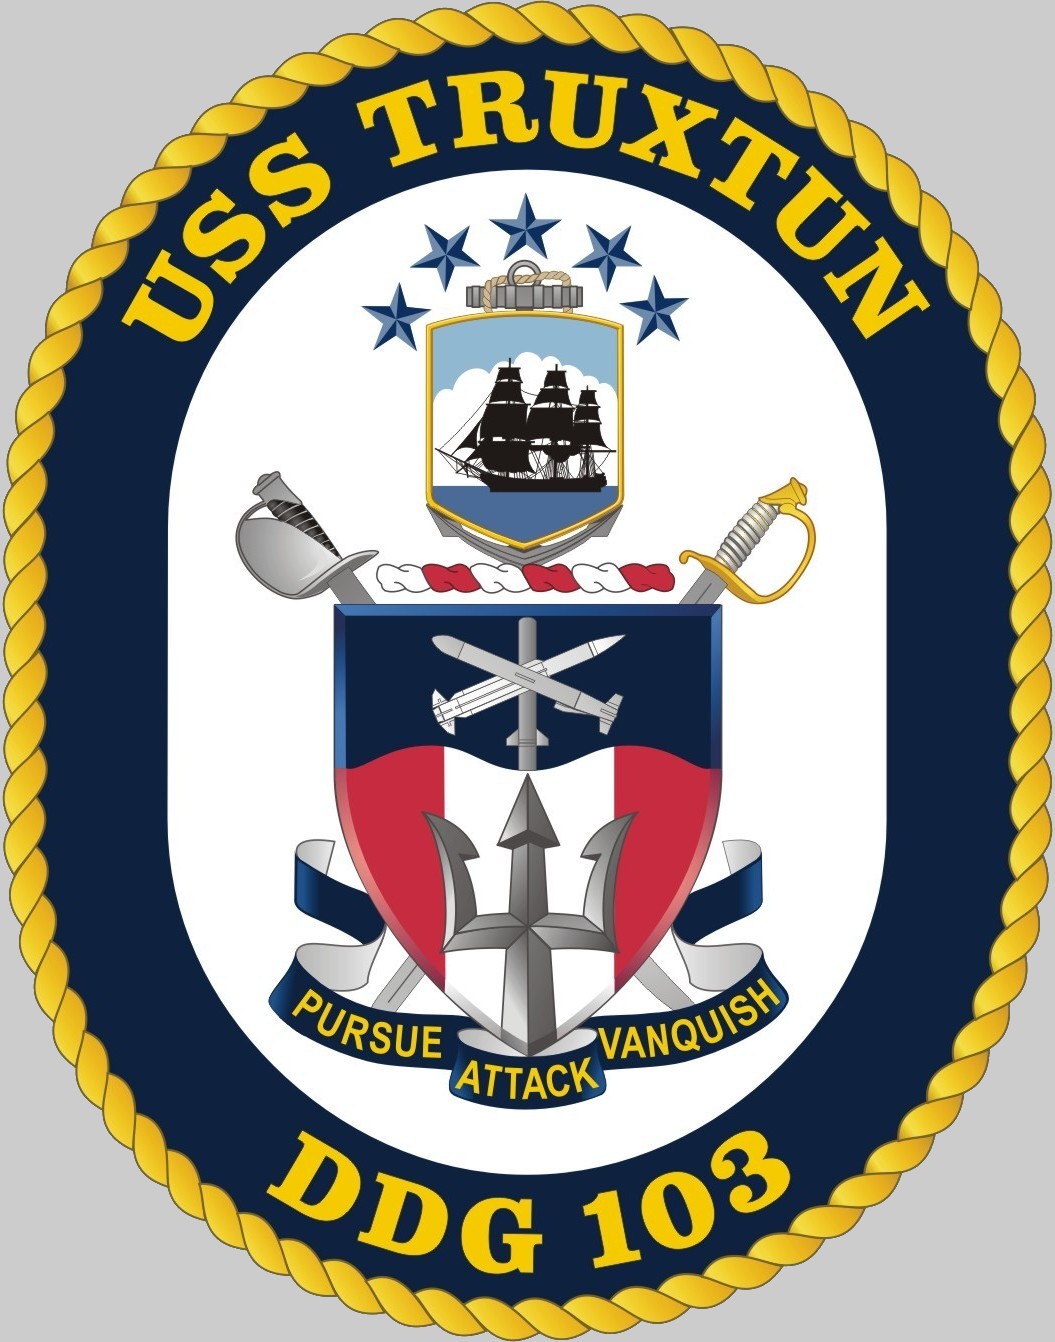 ddg-103 uss truxtun crest insignia patch badge arleigh burke class guided missile destroyer aegis us navy 02x